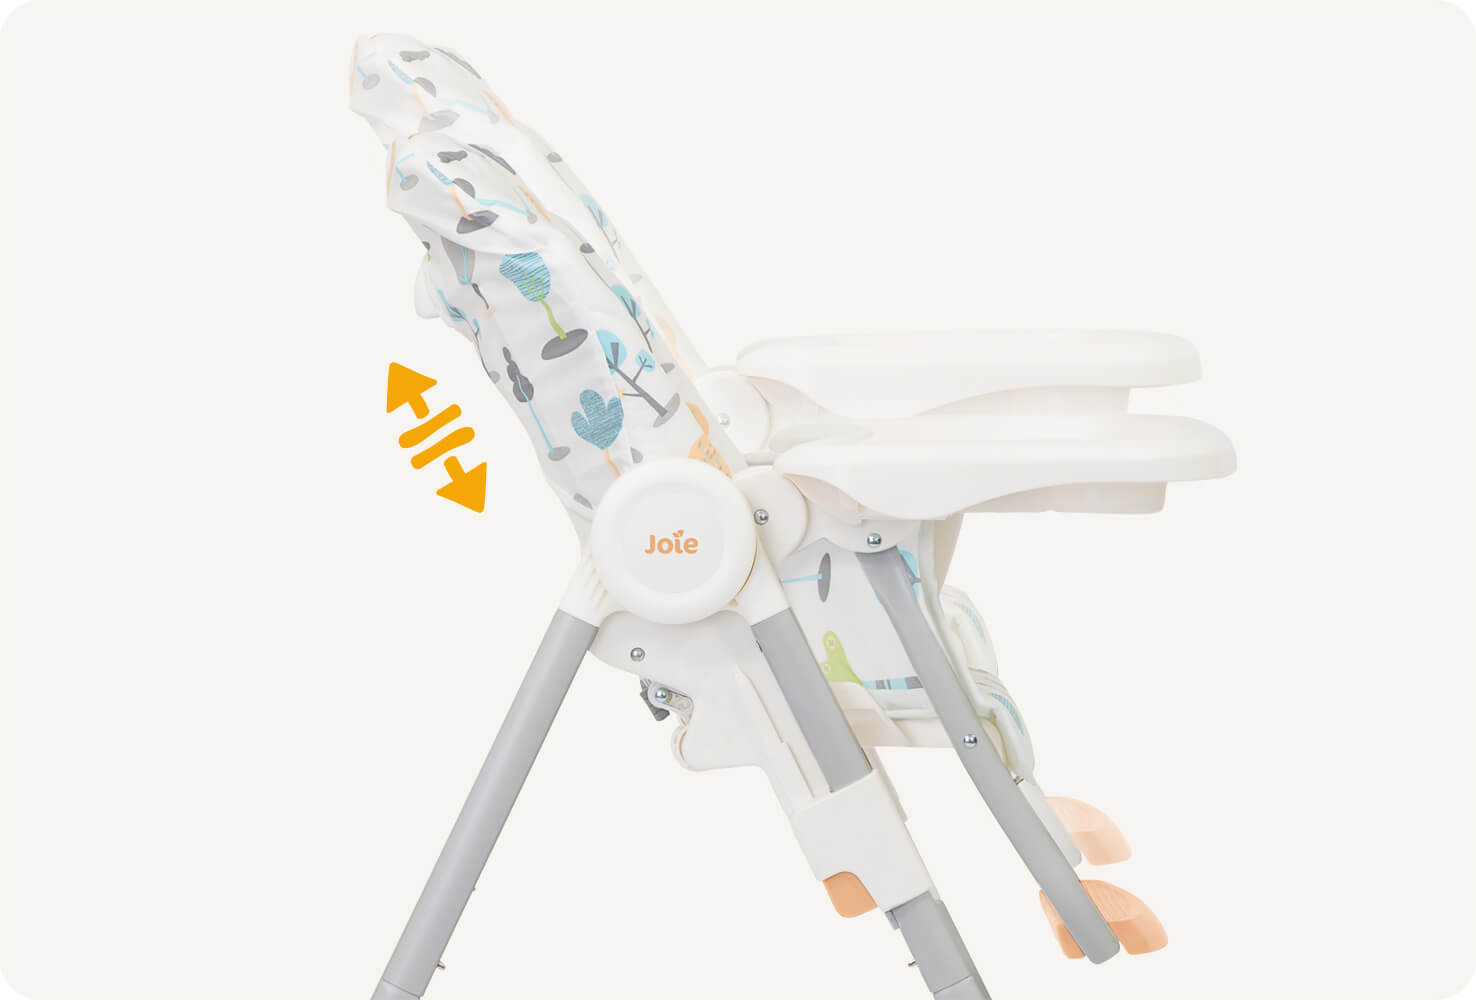 The Joie highchair Snacker 2in1 in a multi-color print featuring illustrations of different trees from a side view with a set of arrows behind the seat pointing up and down to indicate the seat has an adjustable height.